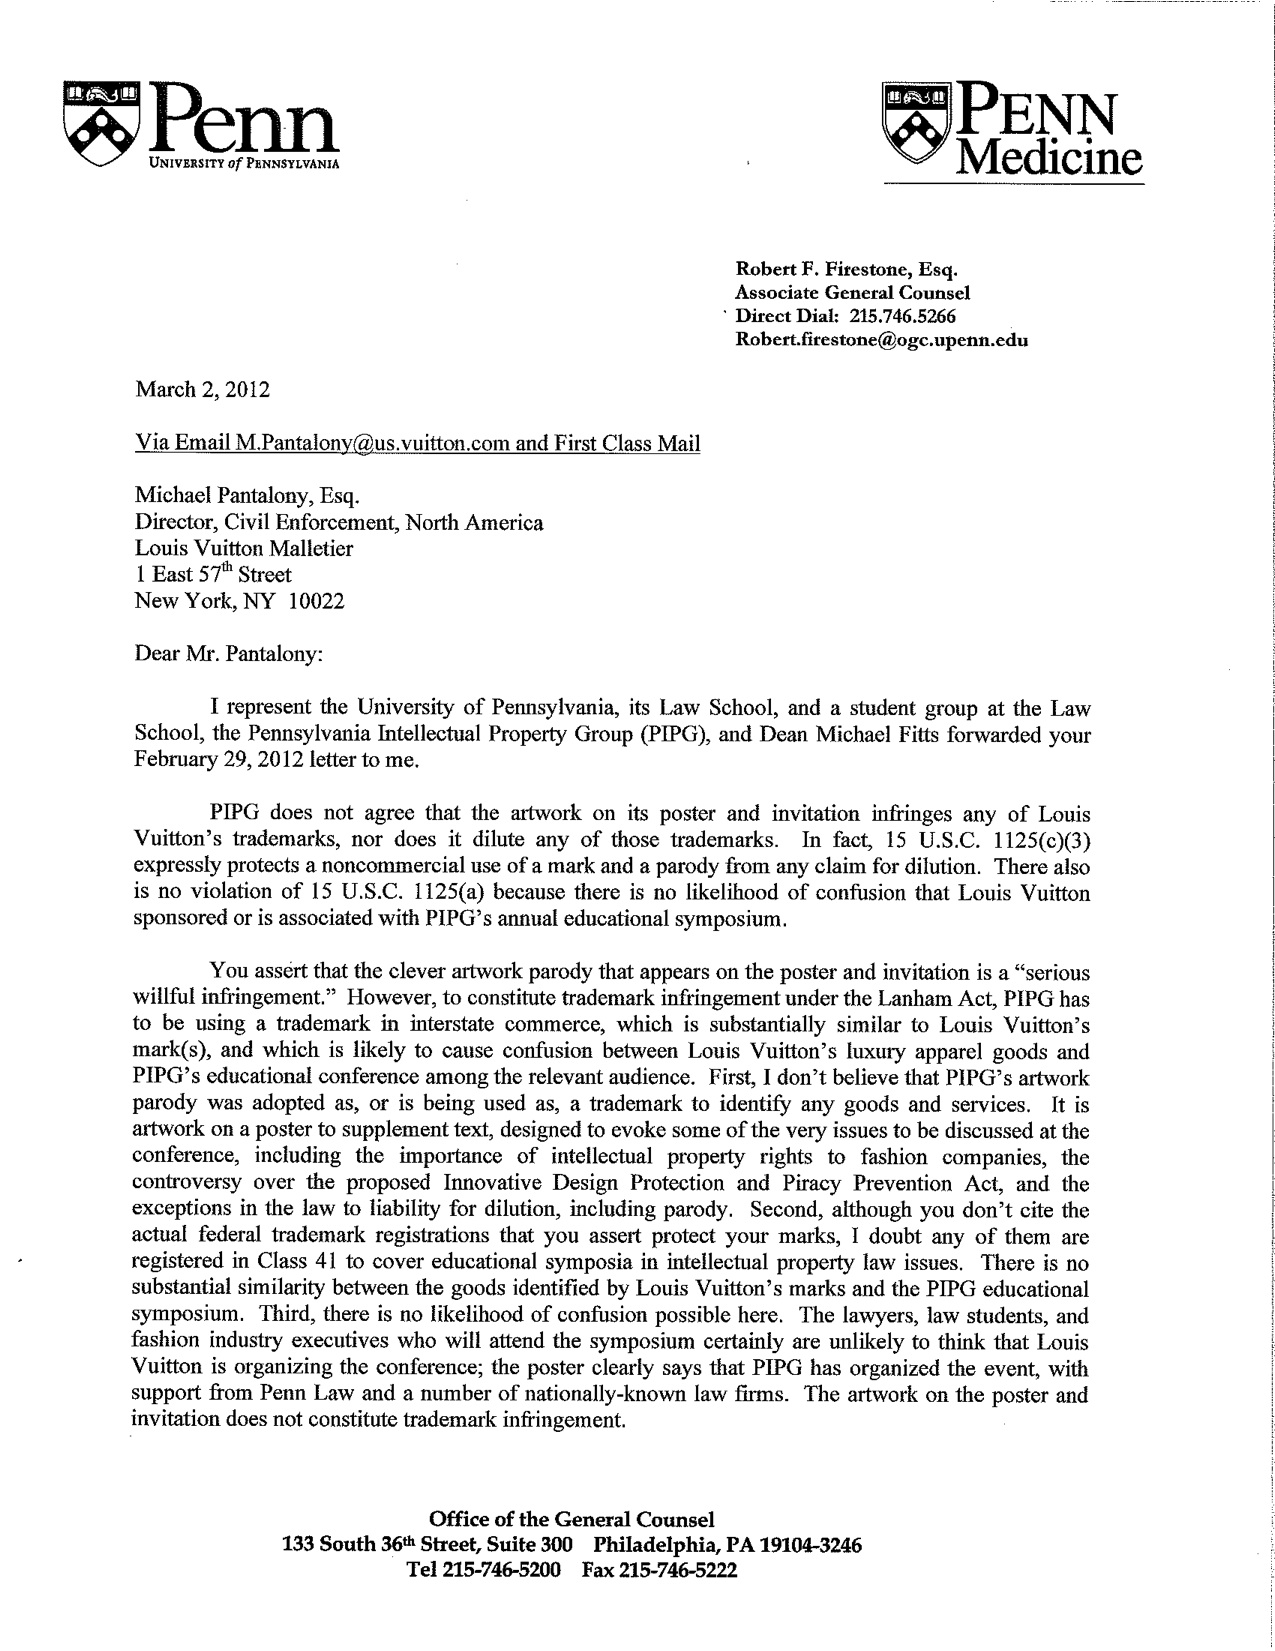 Response To Cease And Desist Letter Template from hautelawdotcom.files.wordpress.com